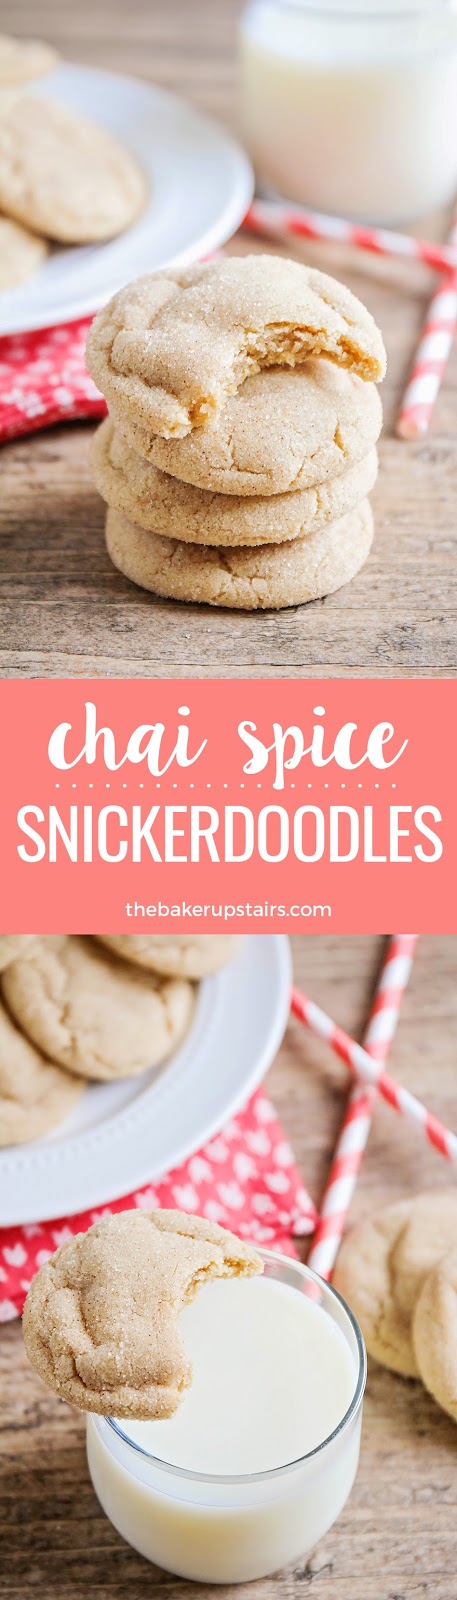 These chai spice snickerdoodles taste amazing and are the perfect mixture of sweetness and spice!